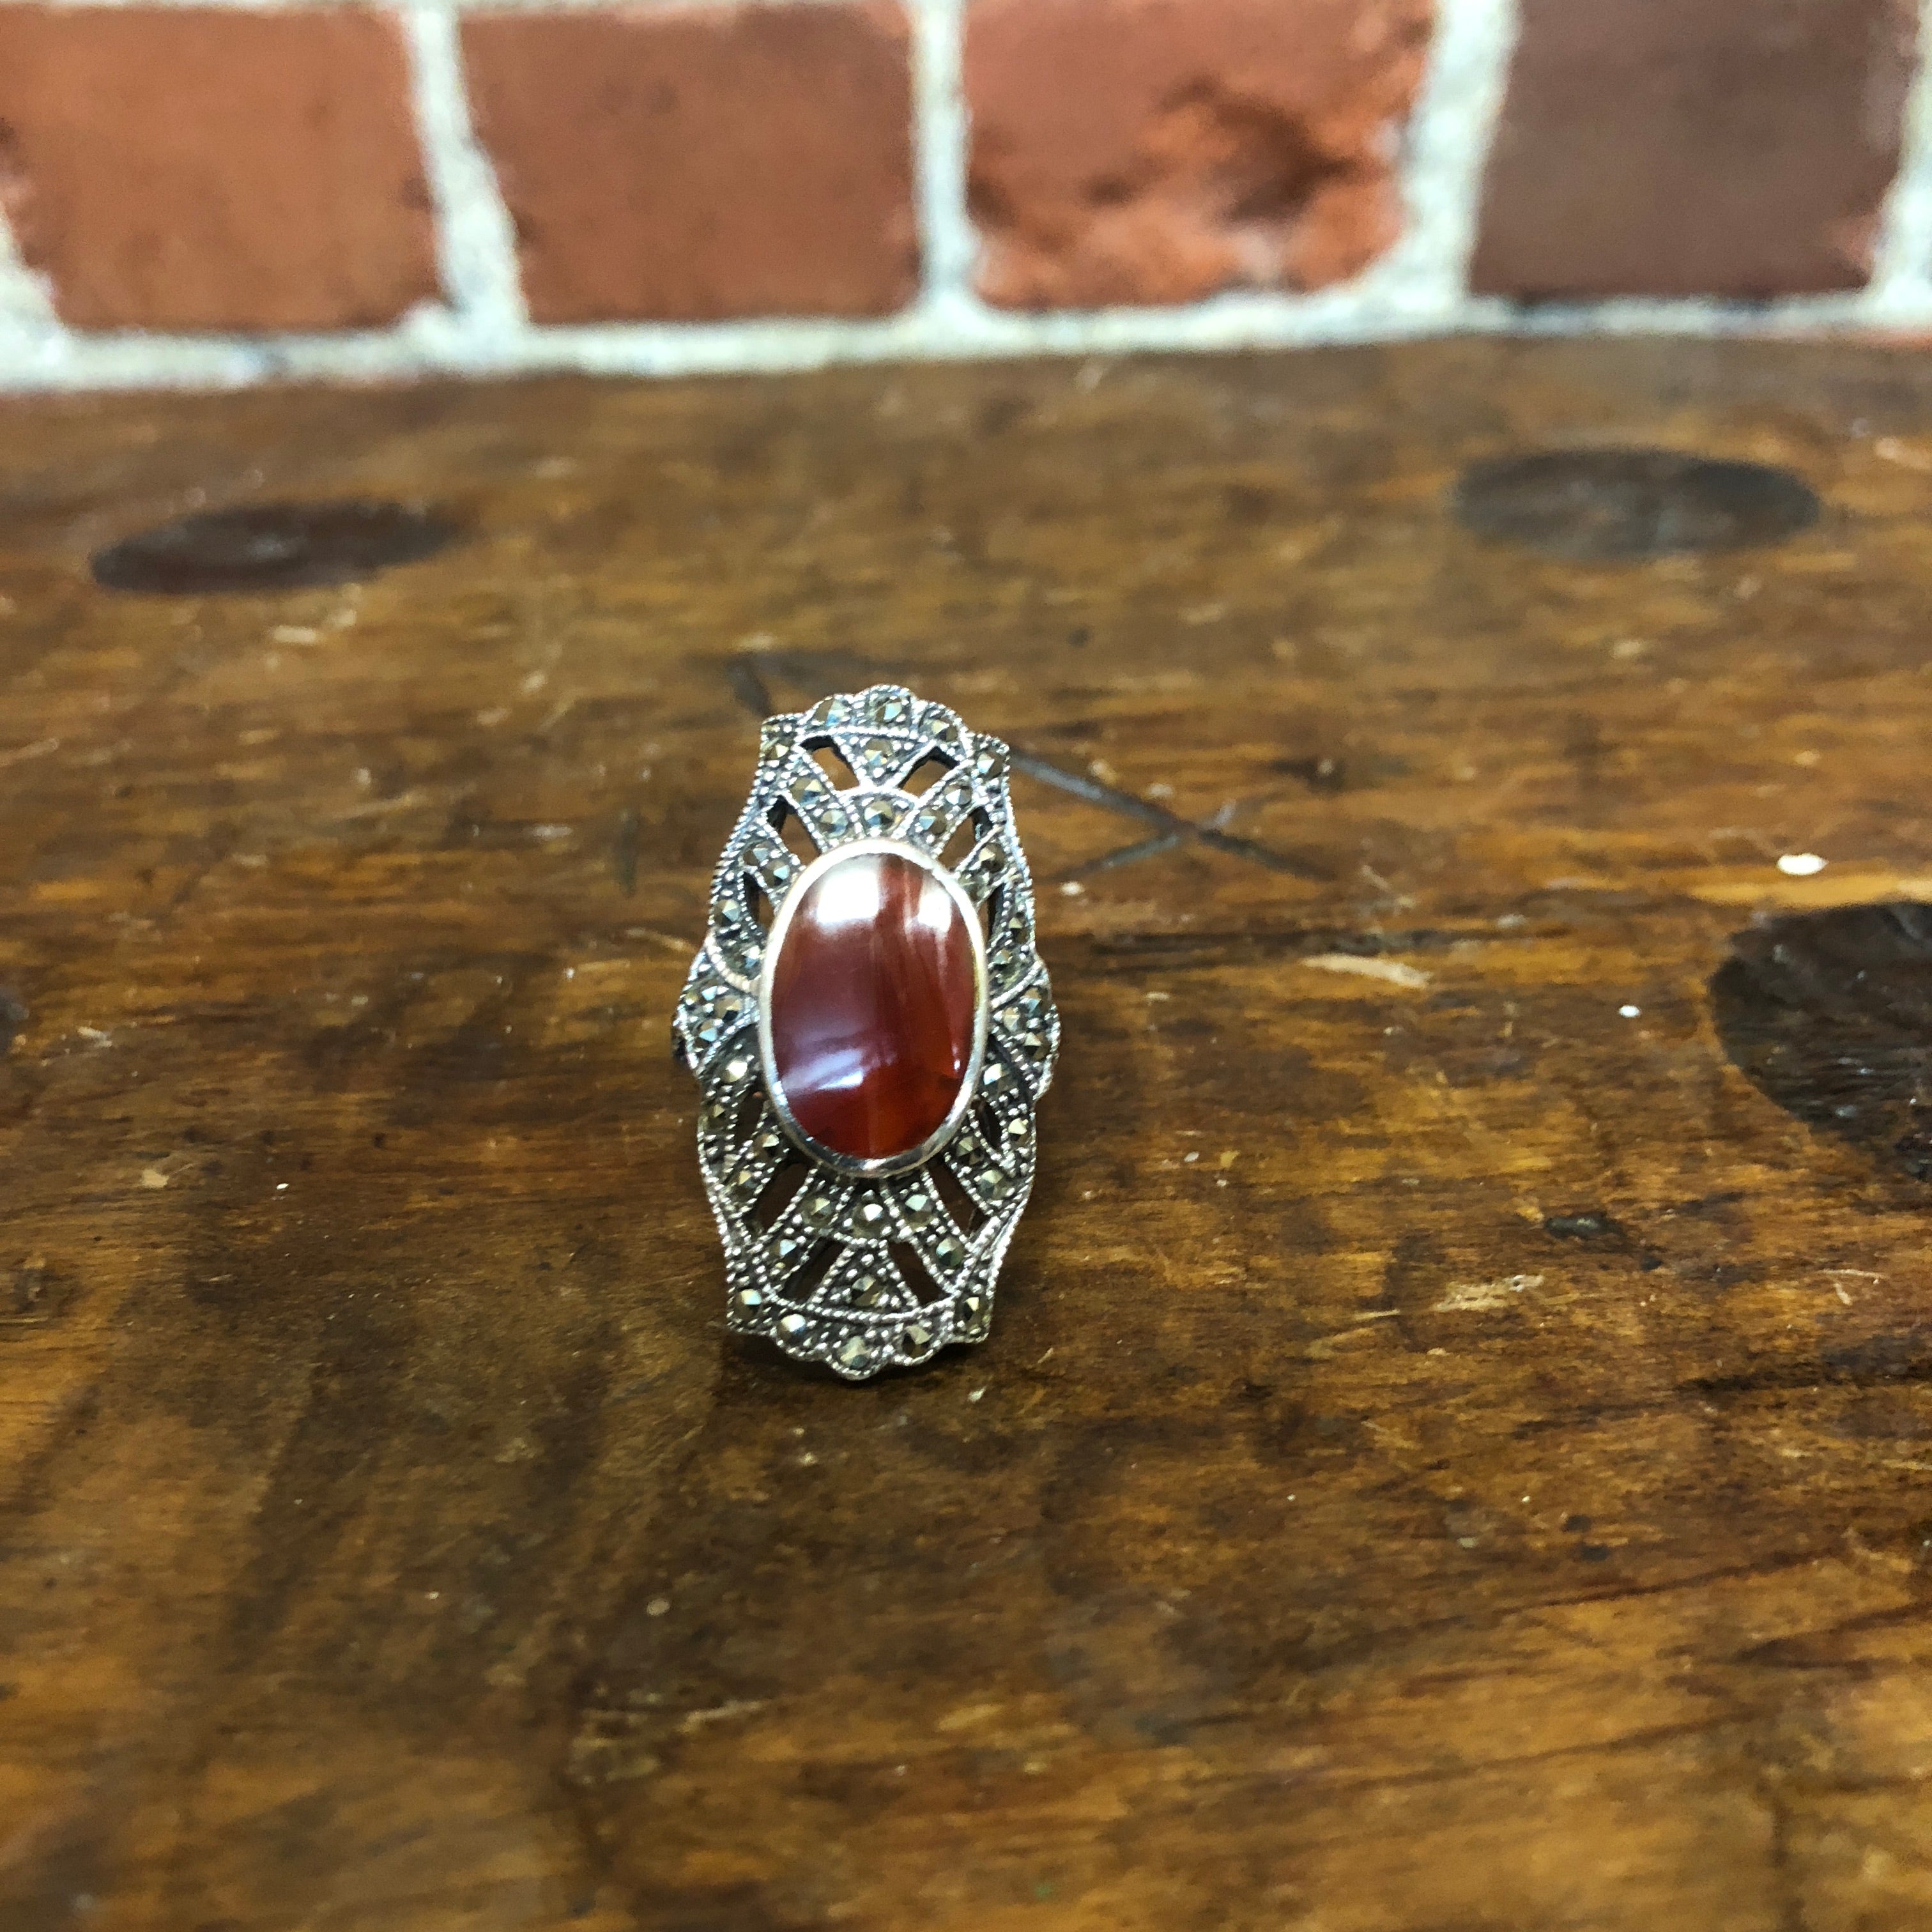 Amber, sterling silver and marcasite ring